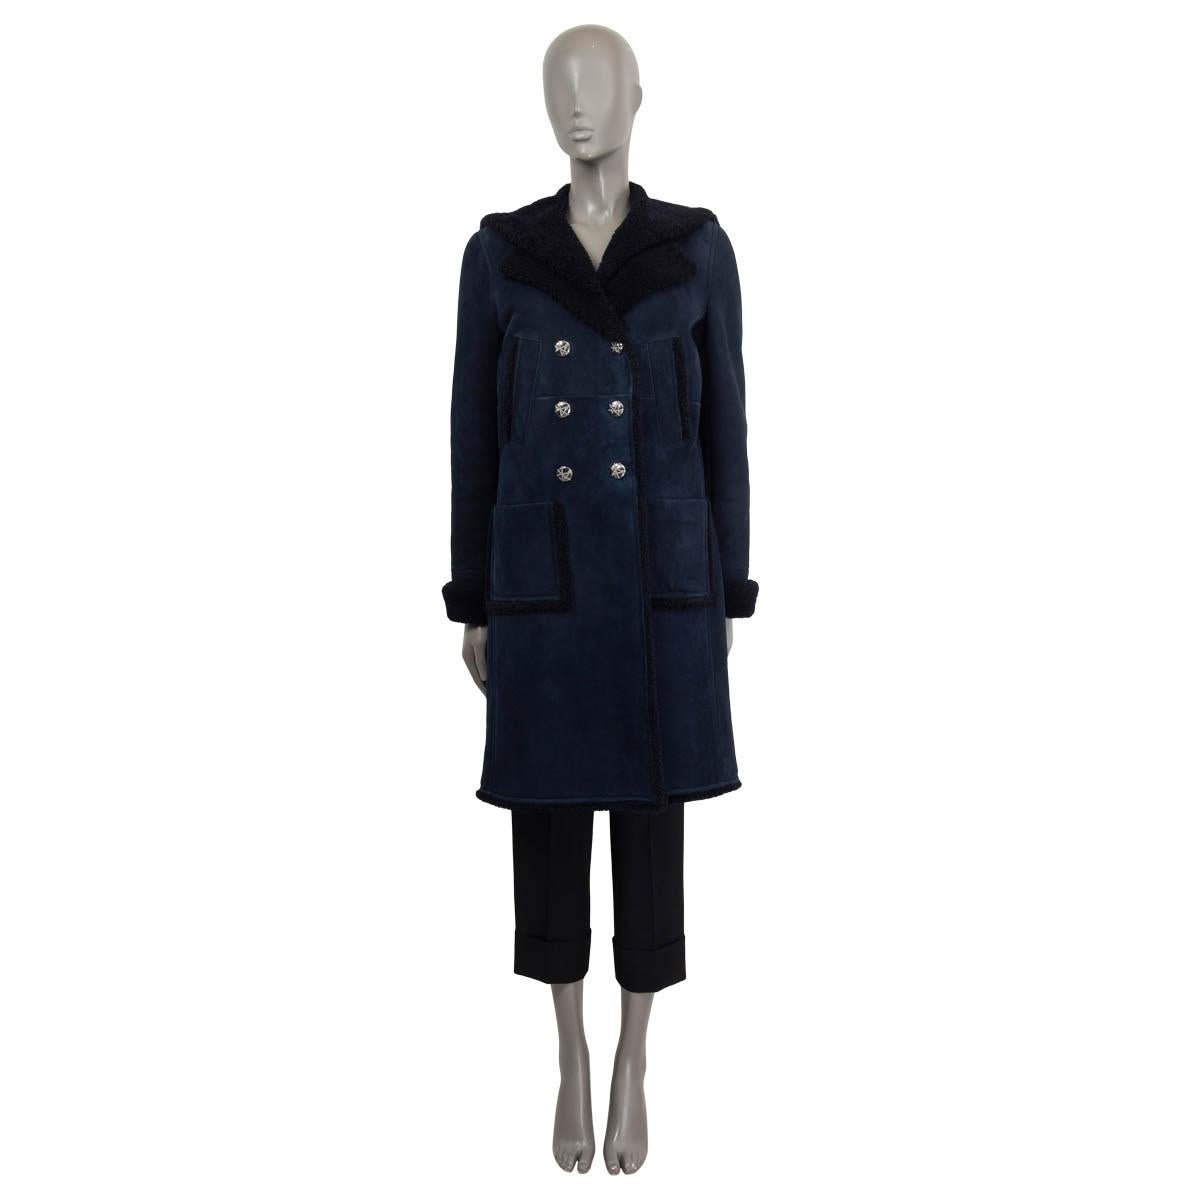 100% authentic Chanel 2018 Hamburg double breasted coat in navy dyed lamb shearling (100%). Features two chest pockets and two patch pockets on the front. Has a sailors flap and a belt on the back. Opens with silver-tone 'CC' buttons on the front.